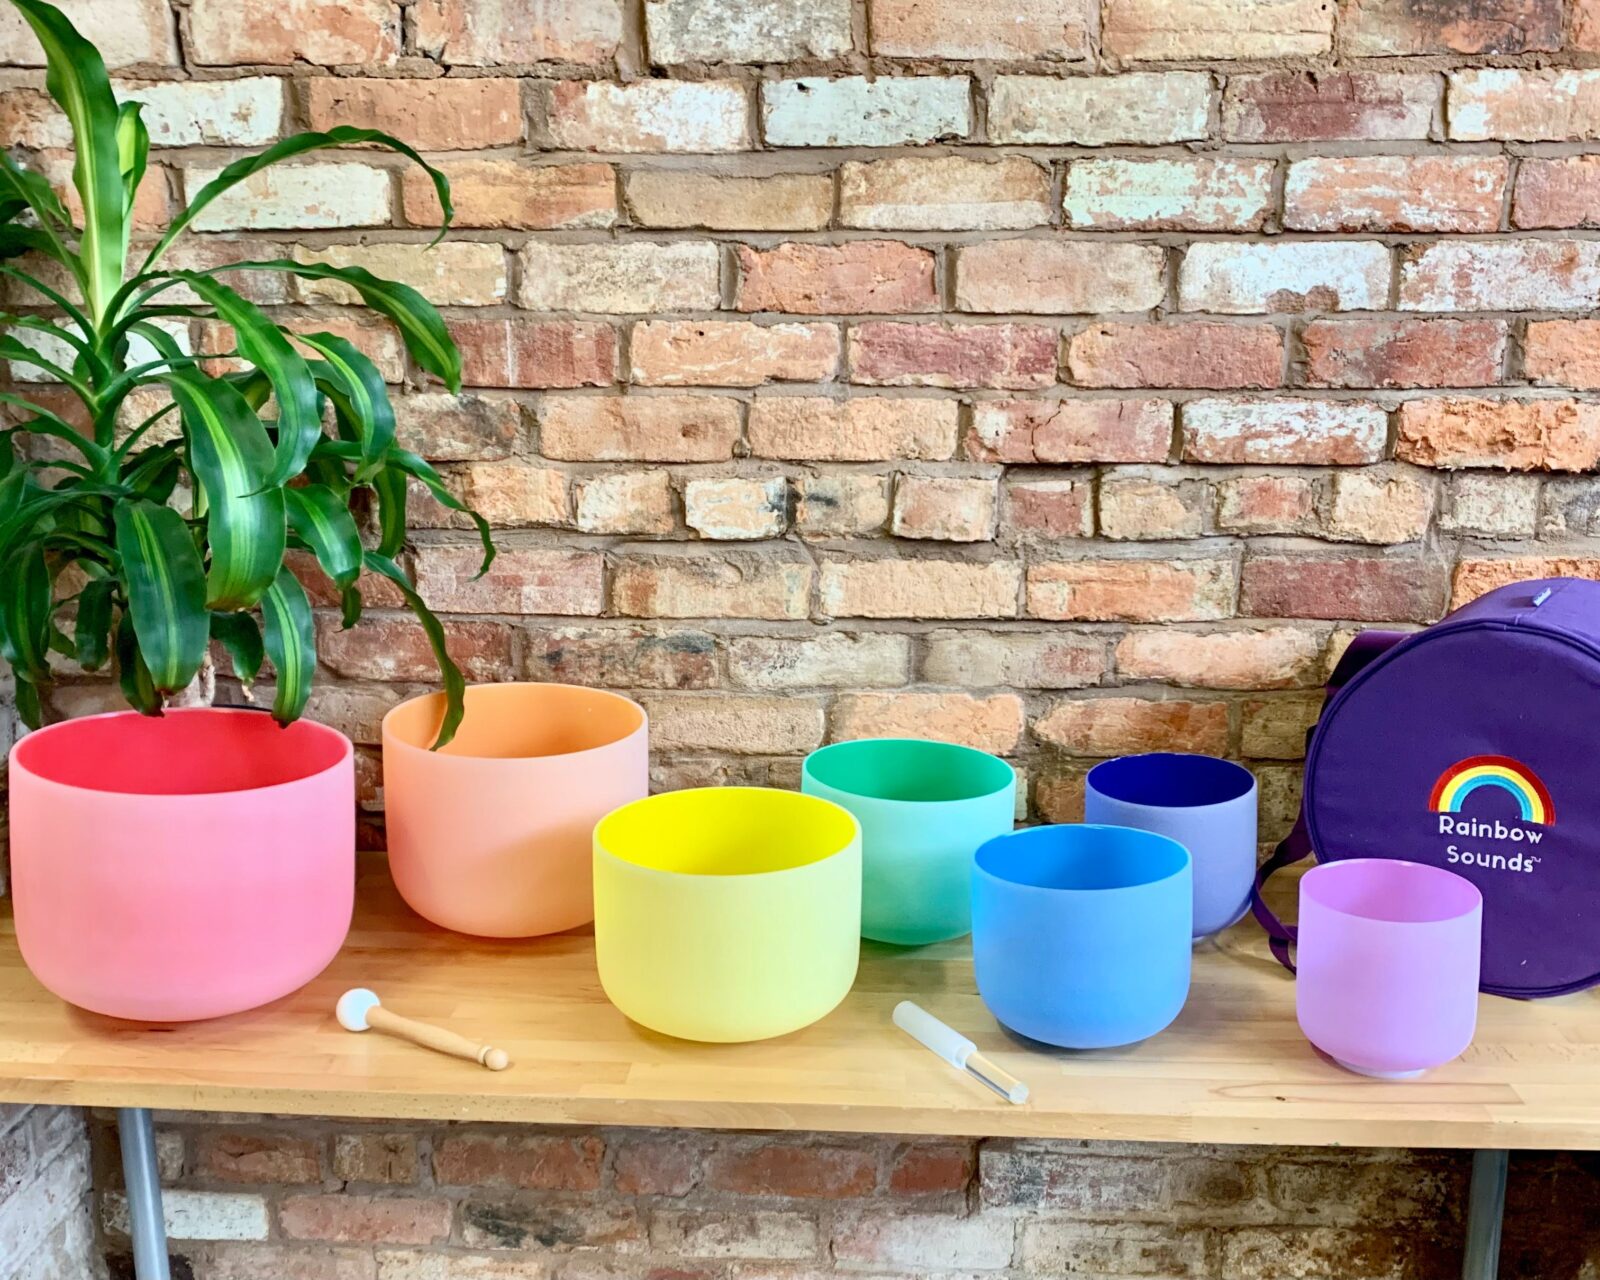 Seven coloured singing bowls on a table.